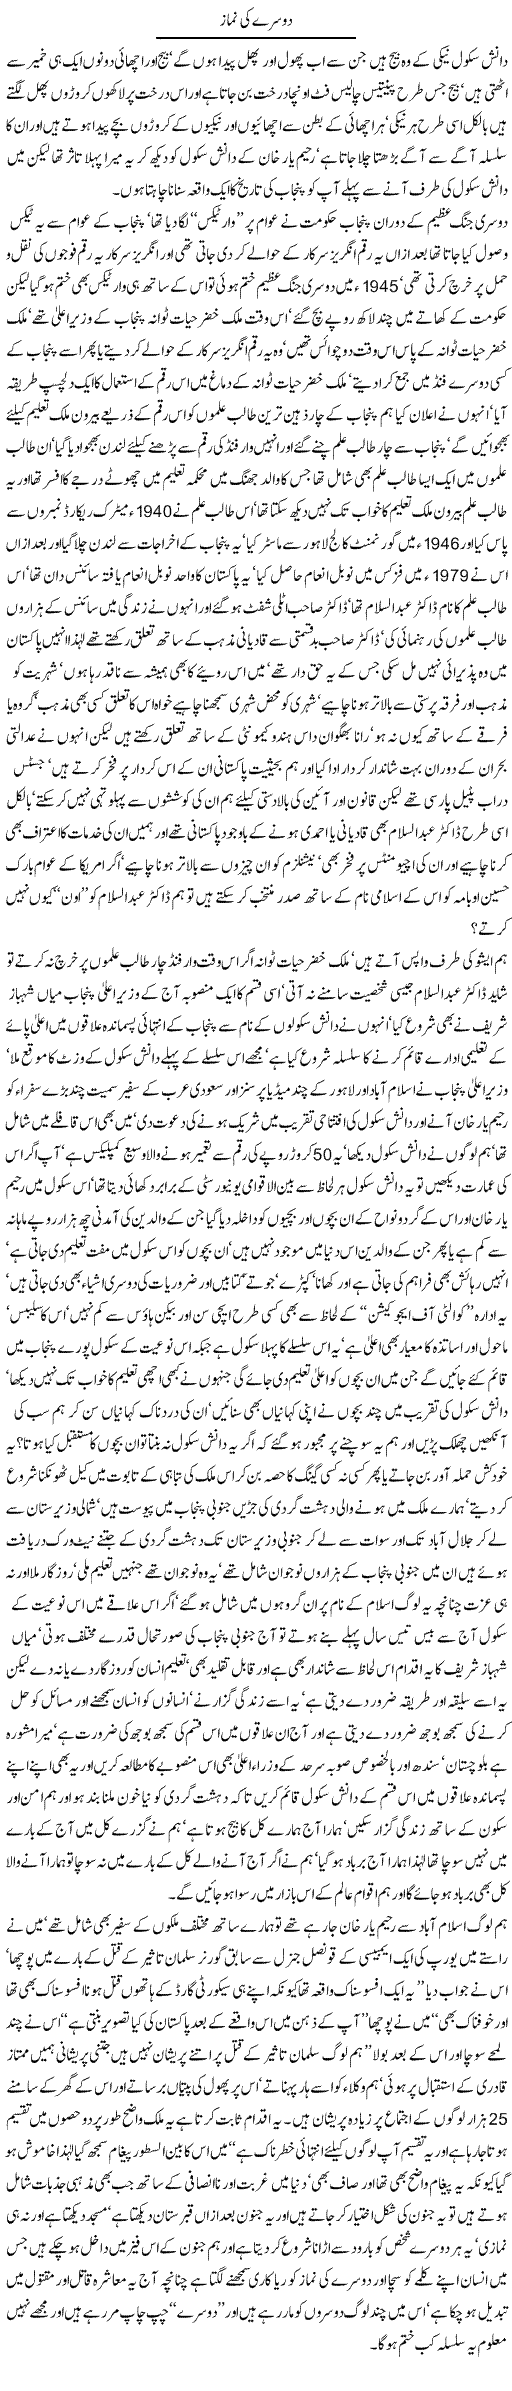 Namaz of Others Express Column Javed Chaudhry 16 January 2011